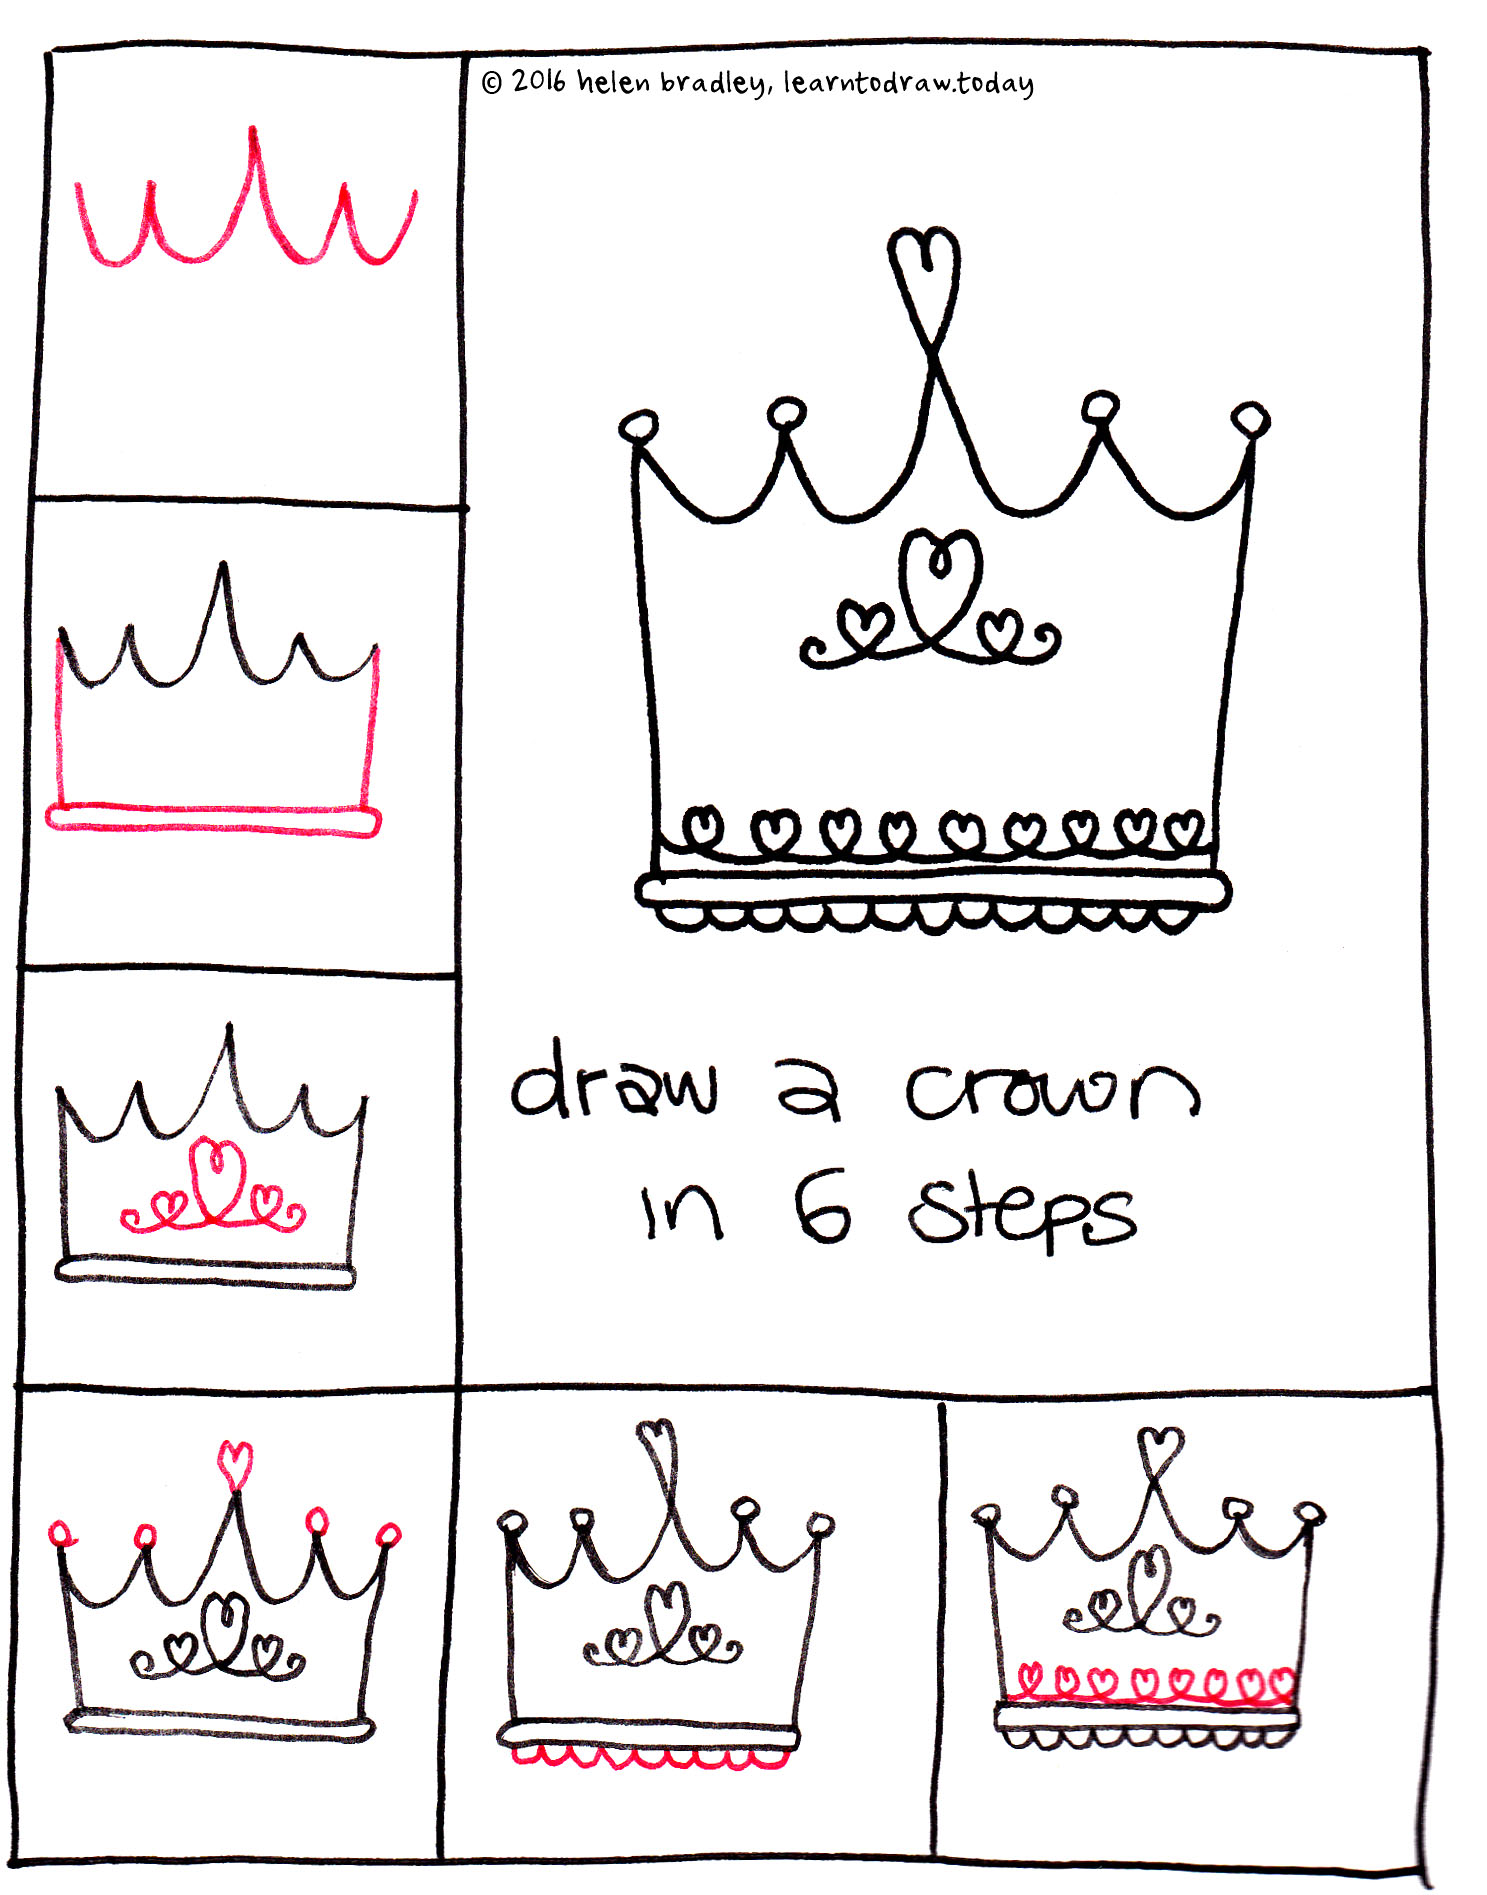 How To Draw A Crown Step By Step